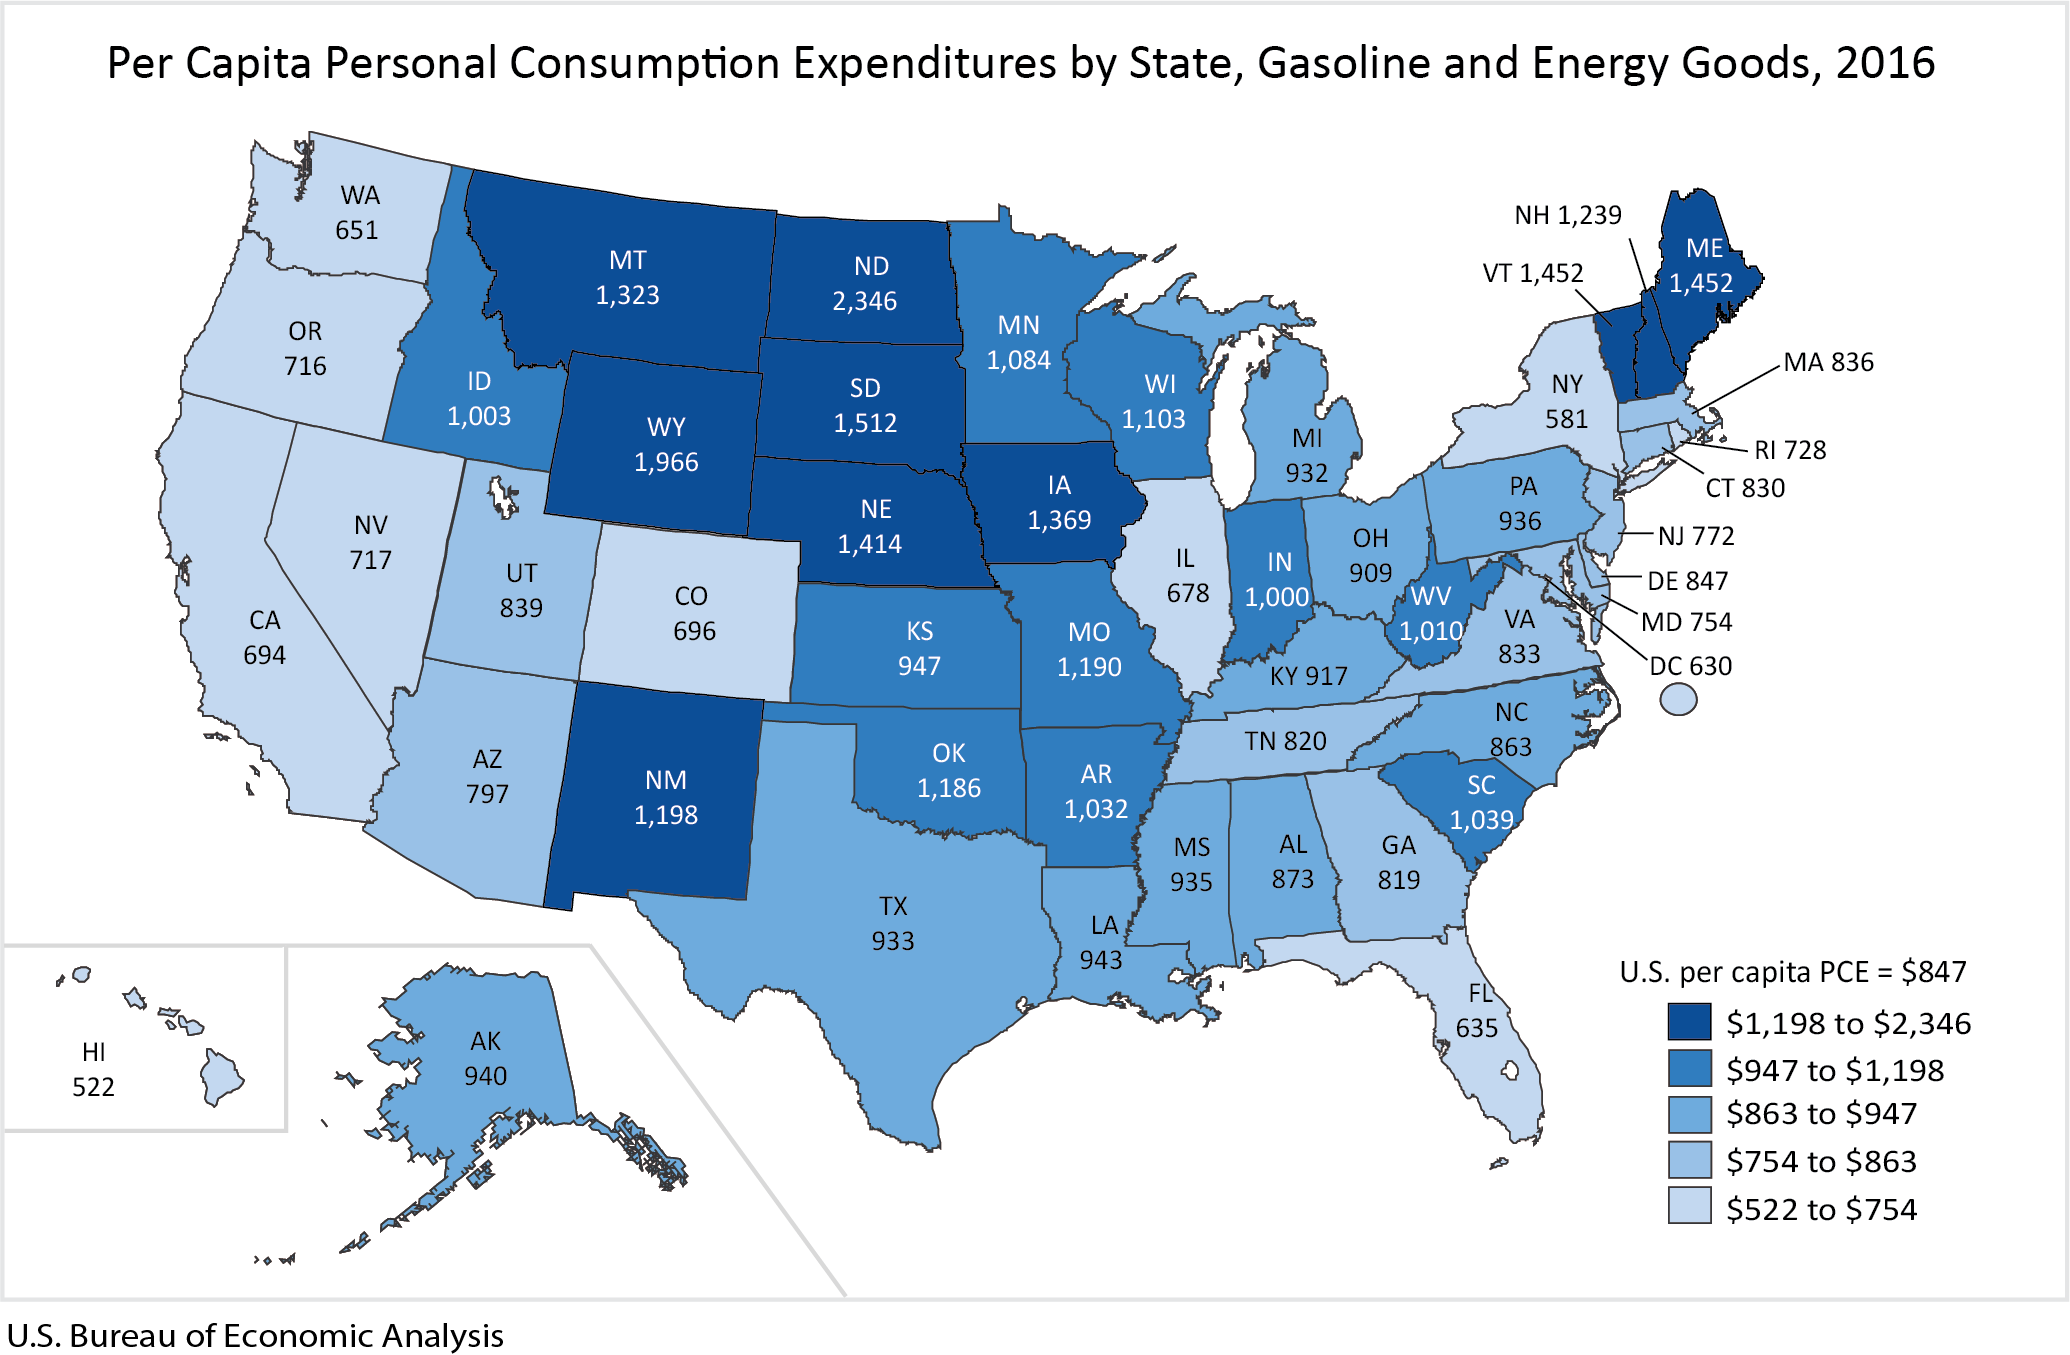 Per Capita Personal Consumption Expenditures by State, Gasoline and Energy Goods, 2016